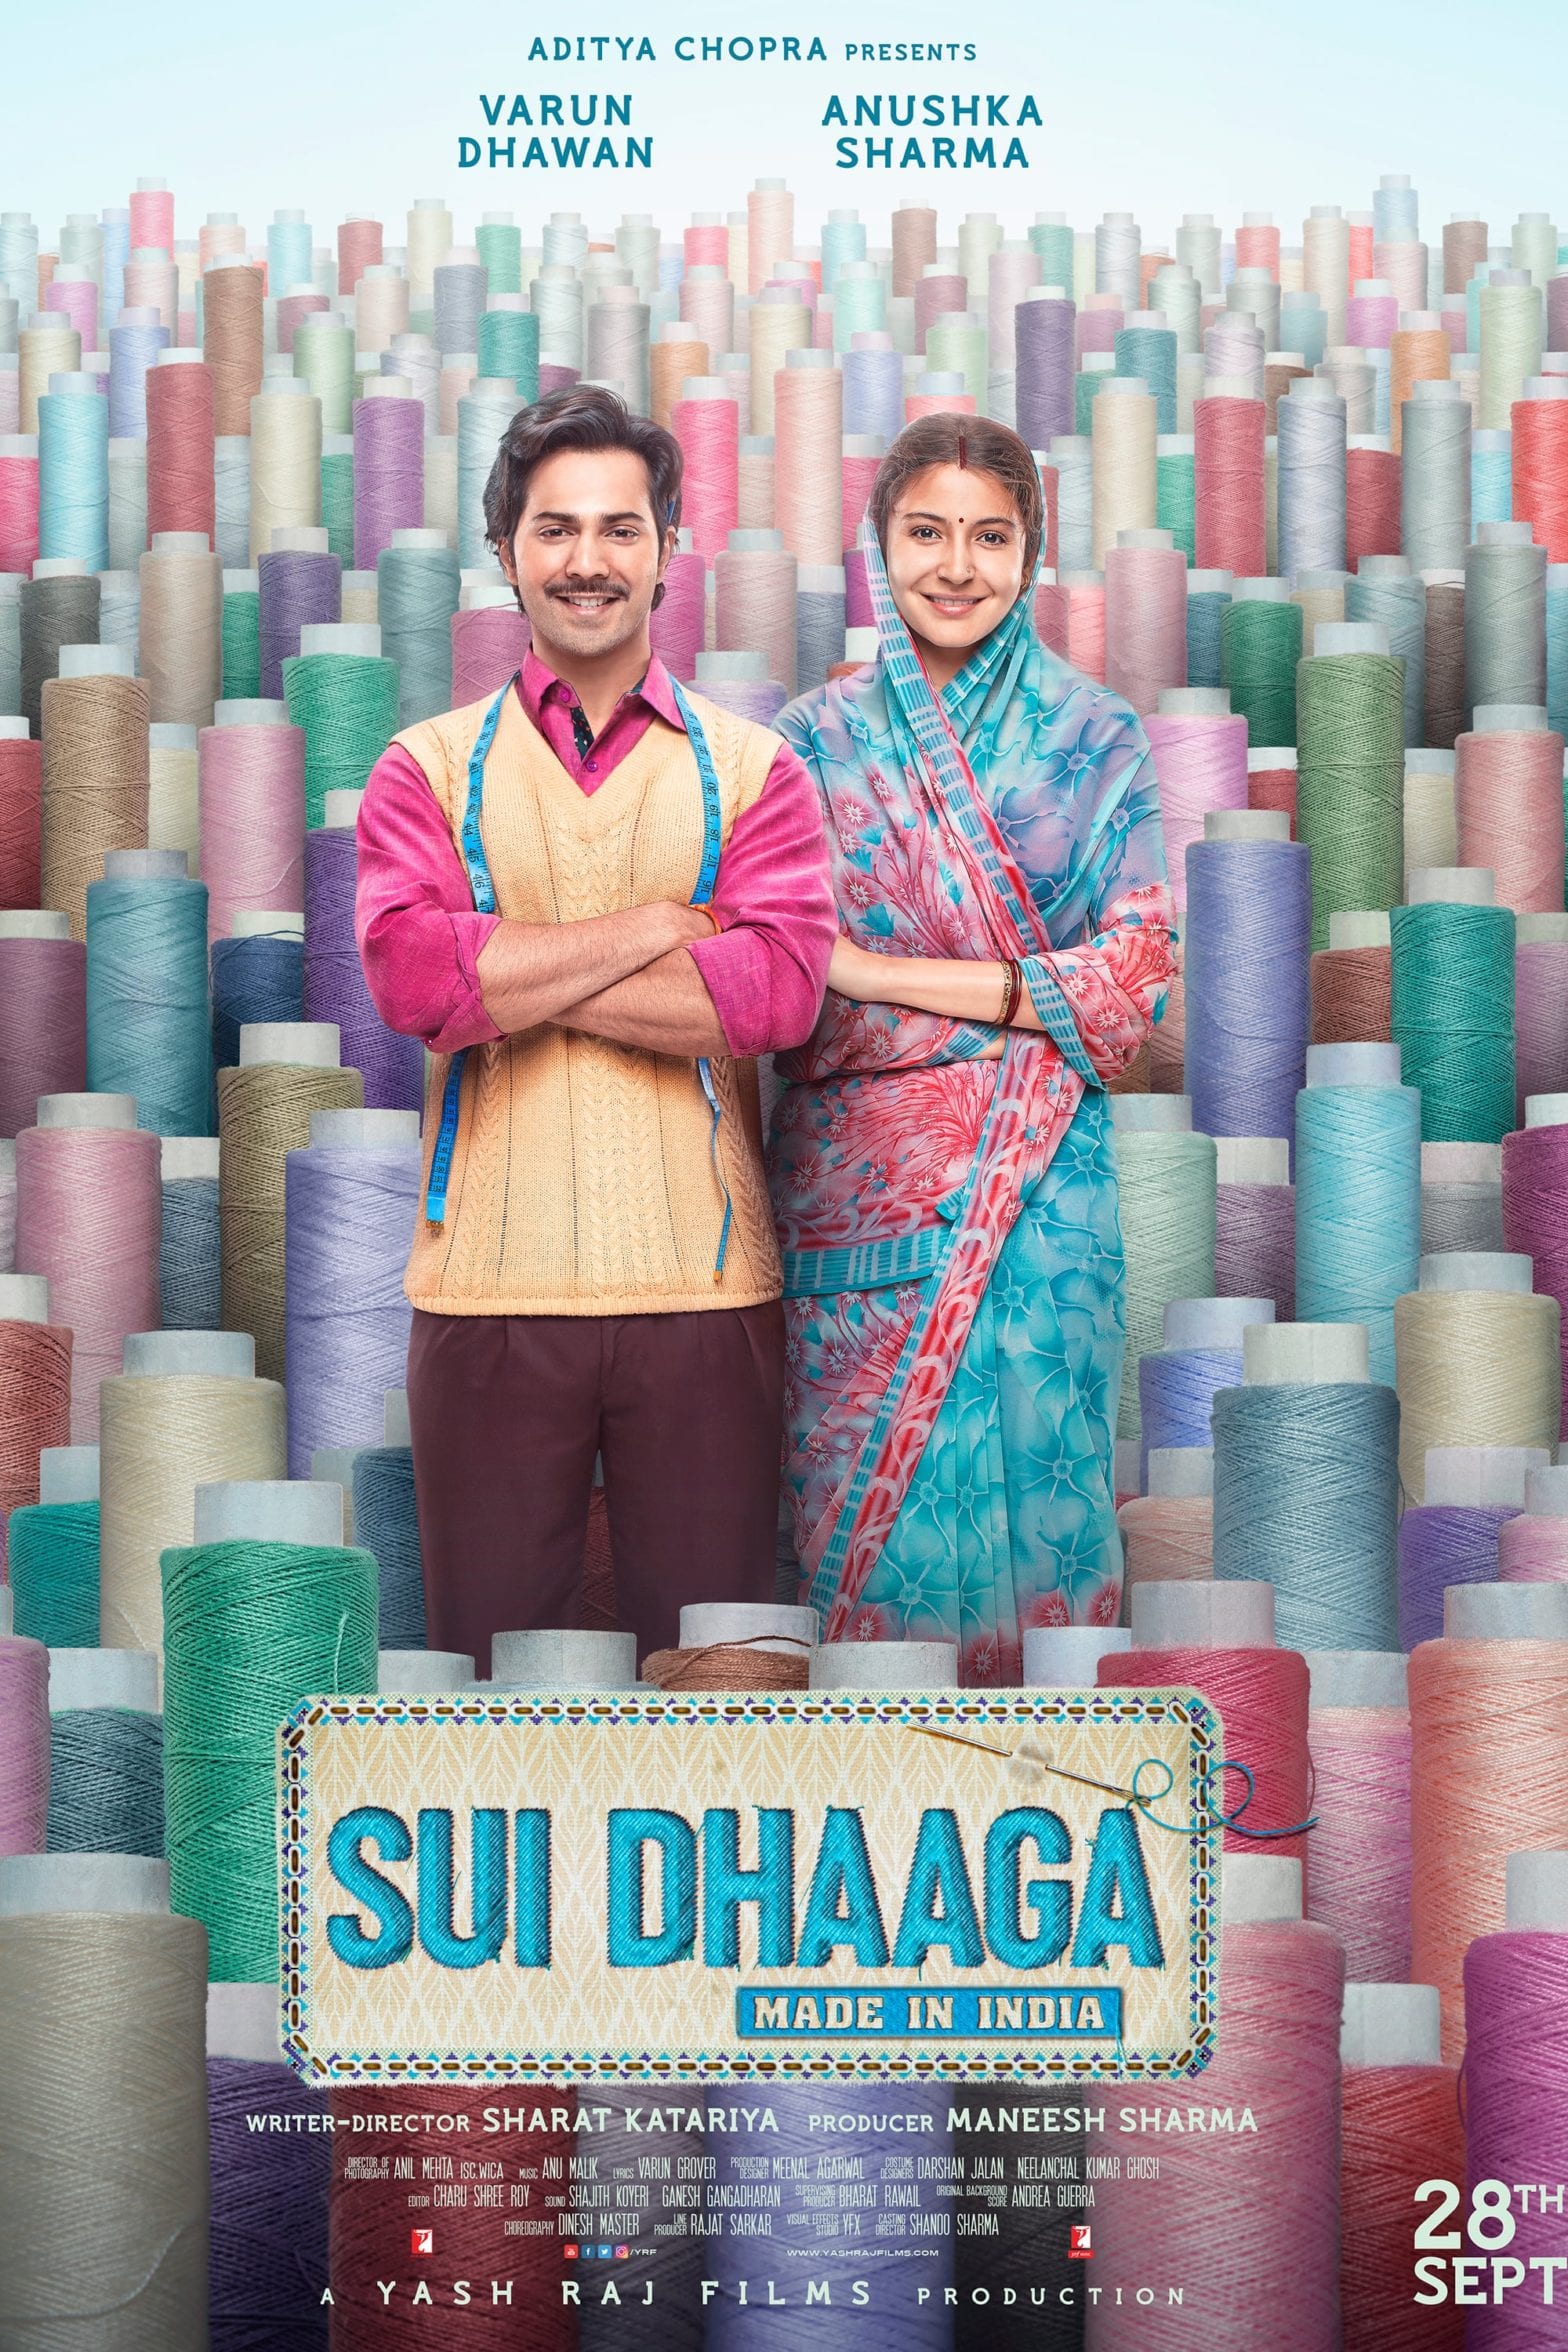 Poster for the movie "Sui Dhaaga - Made in India"